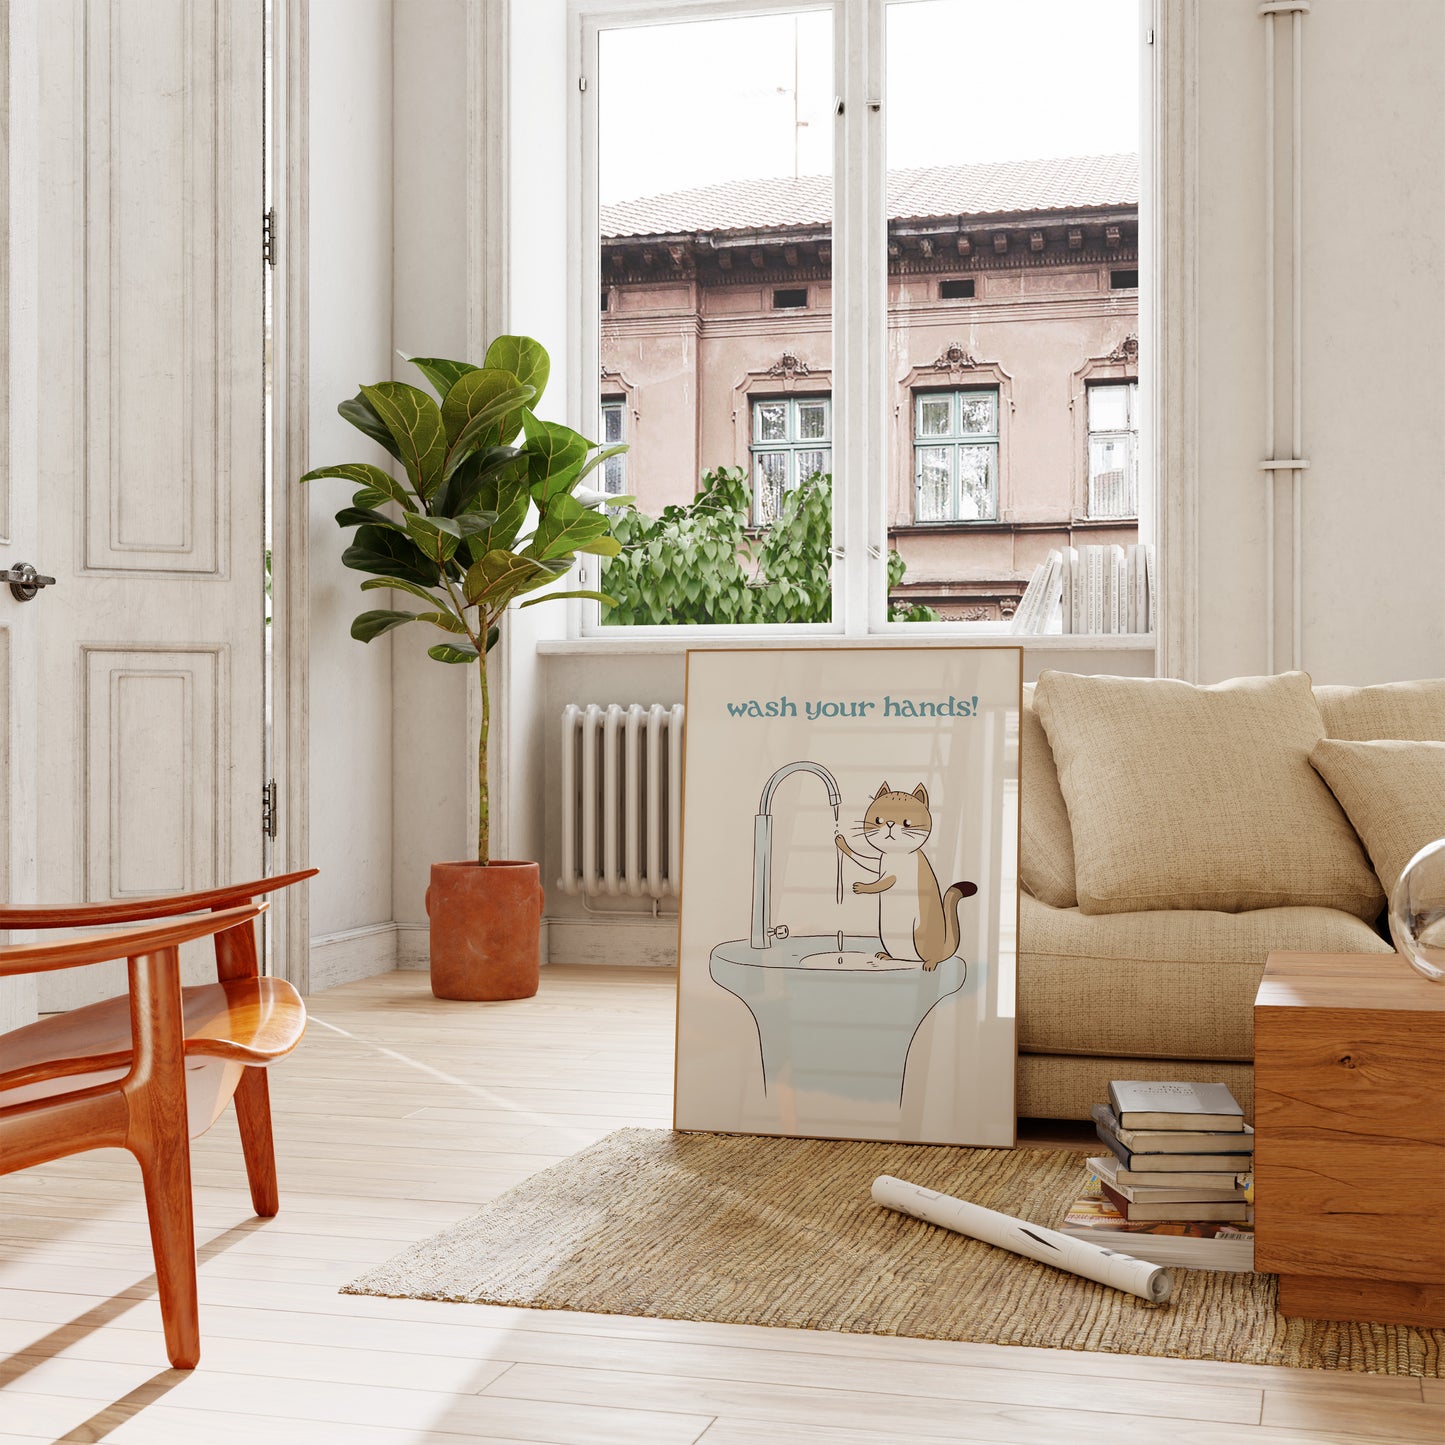 Cozy living room with a "wash your hands" poster, a plant, and furniture.